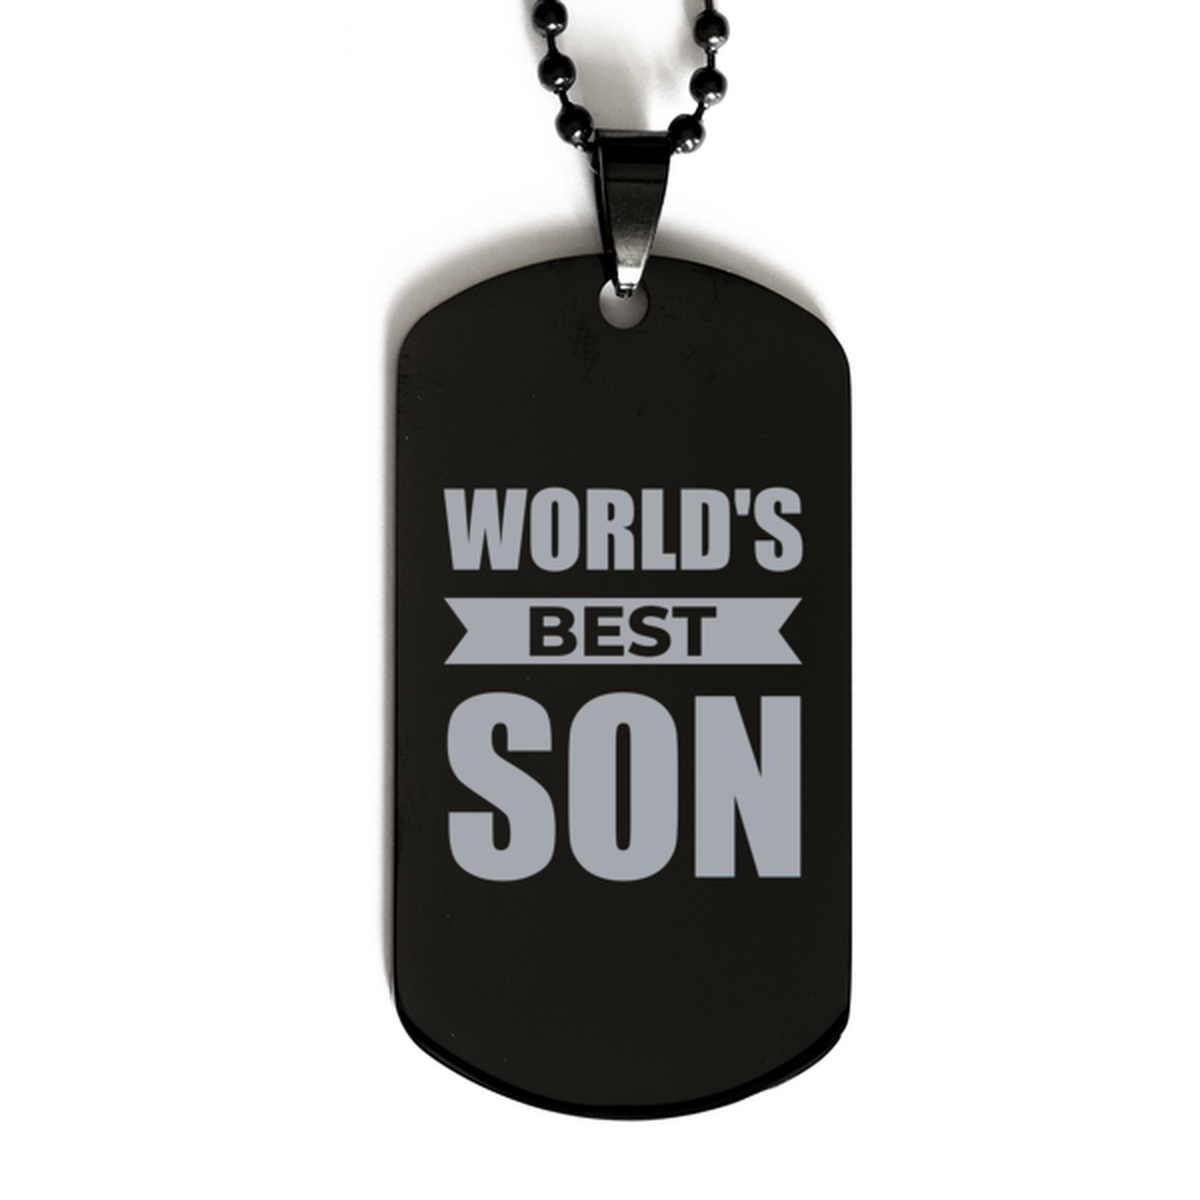 Worlds Best Son Gifts, Funny Black Engraved Dog Tag For Son, Birthday Presents For Men